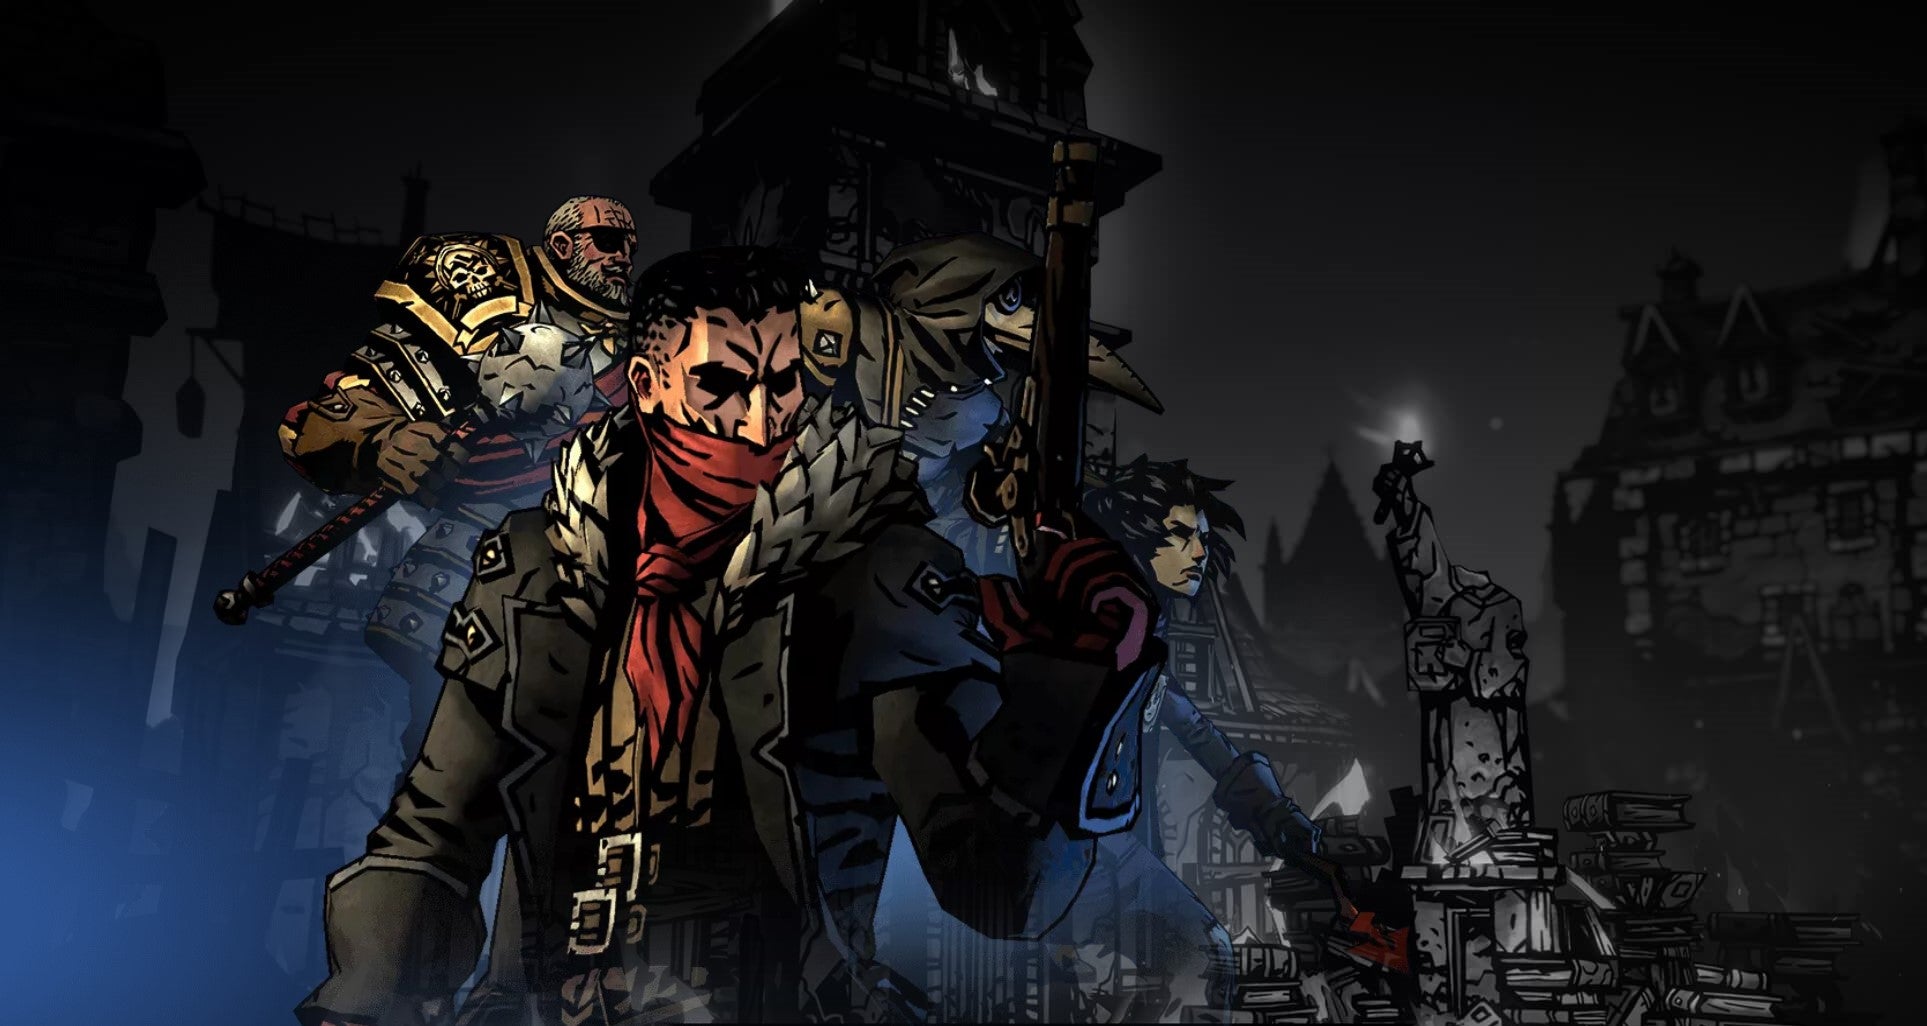 Image for Darkest Dungeon 2 is set for a February 2023 release on Steam and the Epic Games Store